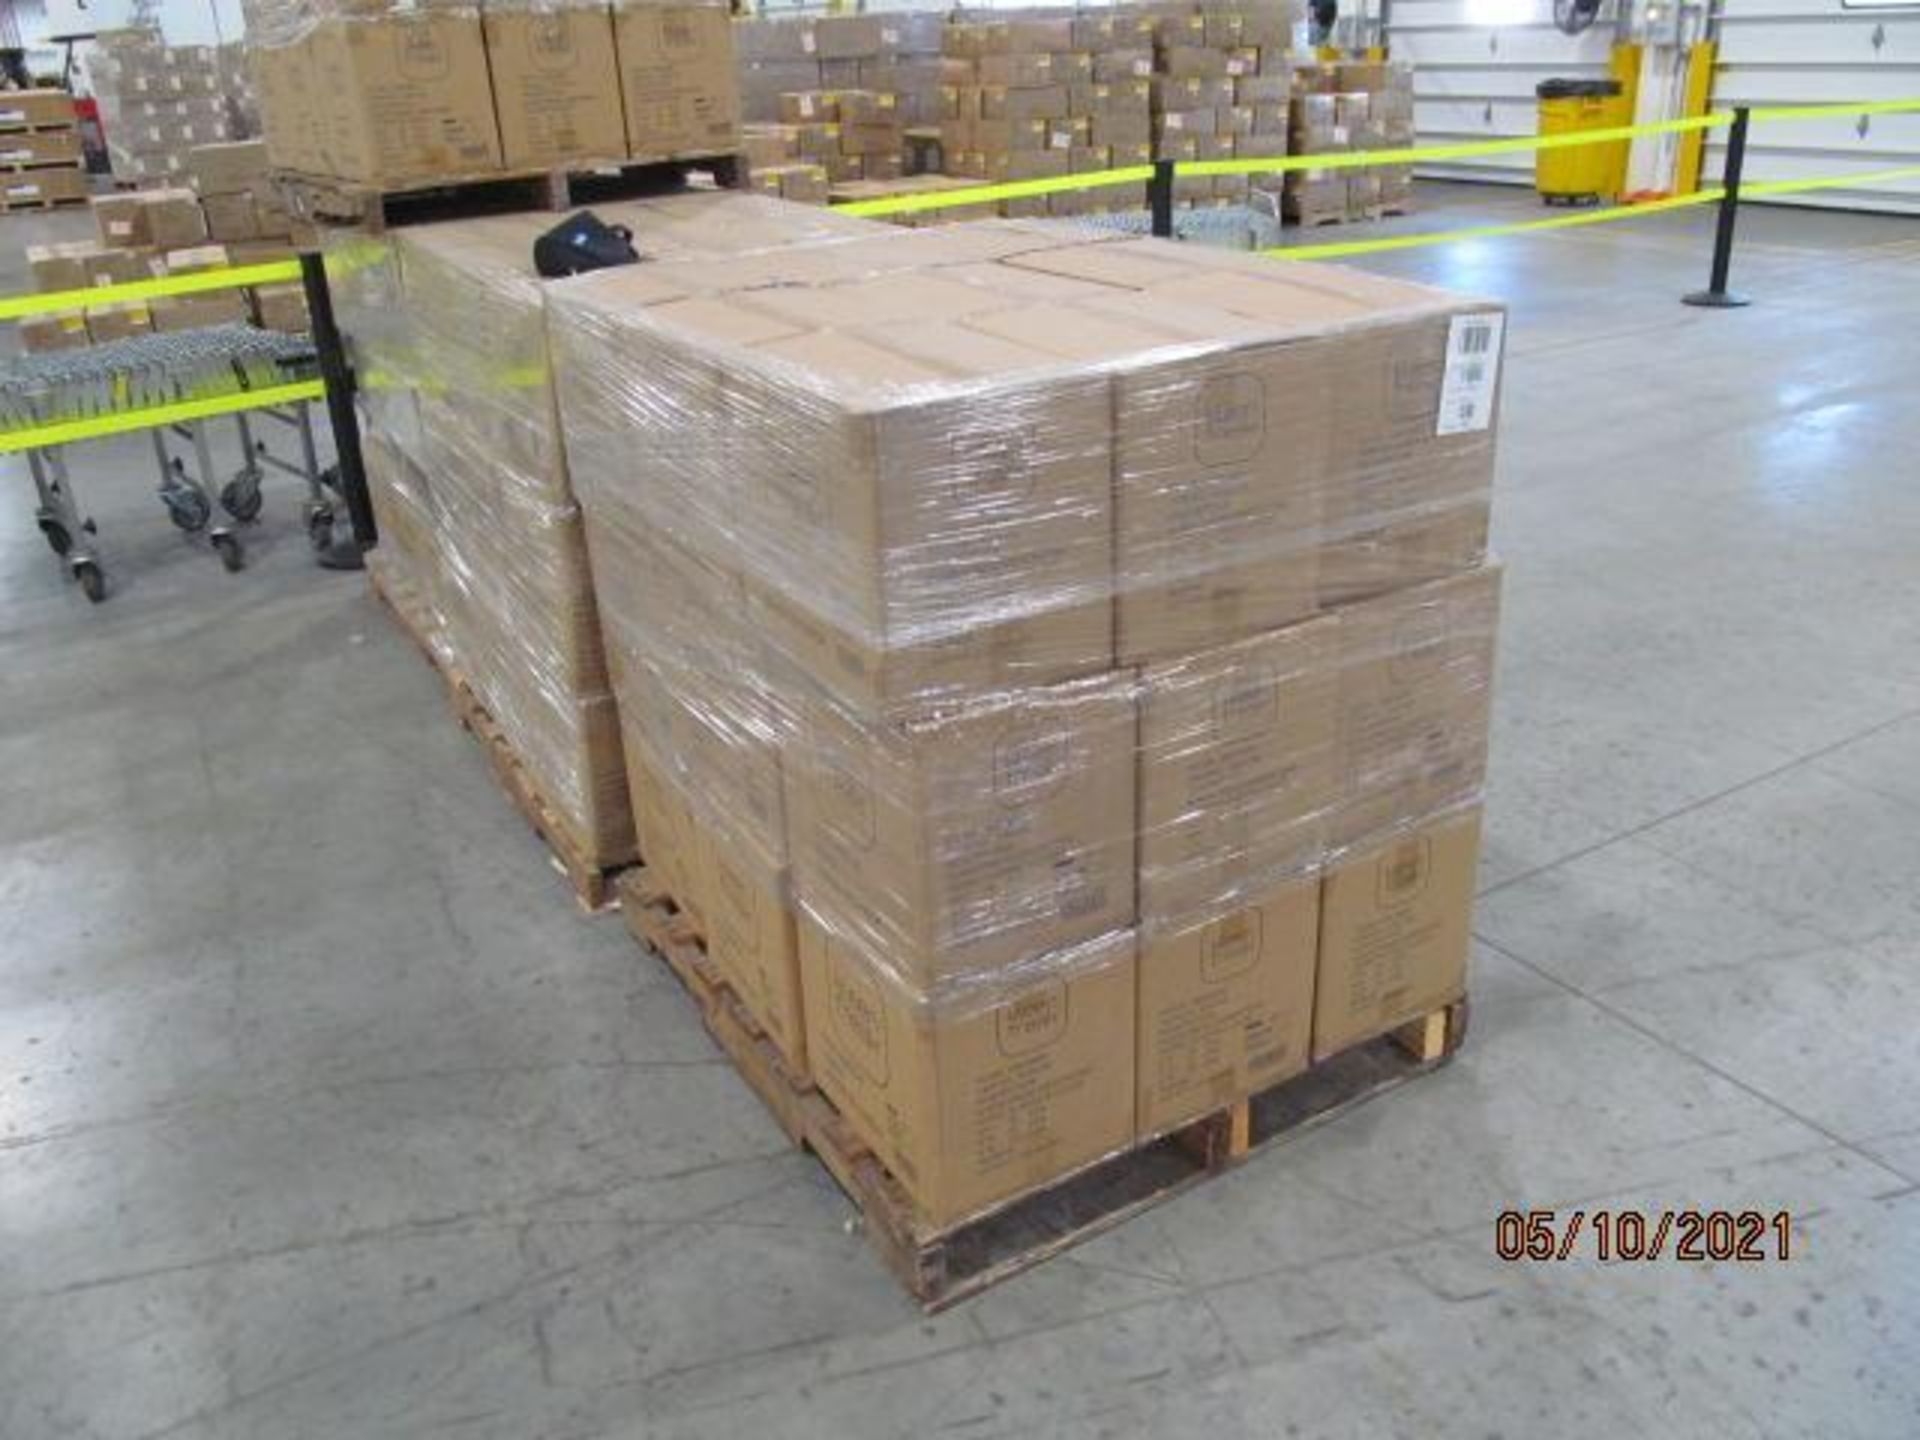 Lot of Waxman Kleen Freak Sanitizing Wipes consisting of 6,480 packages on 10 pallets. Each package - Image 7 of 11